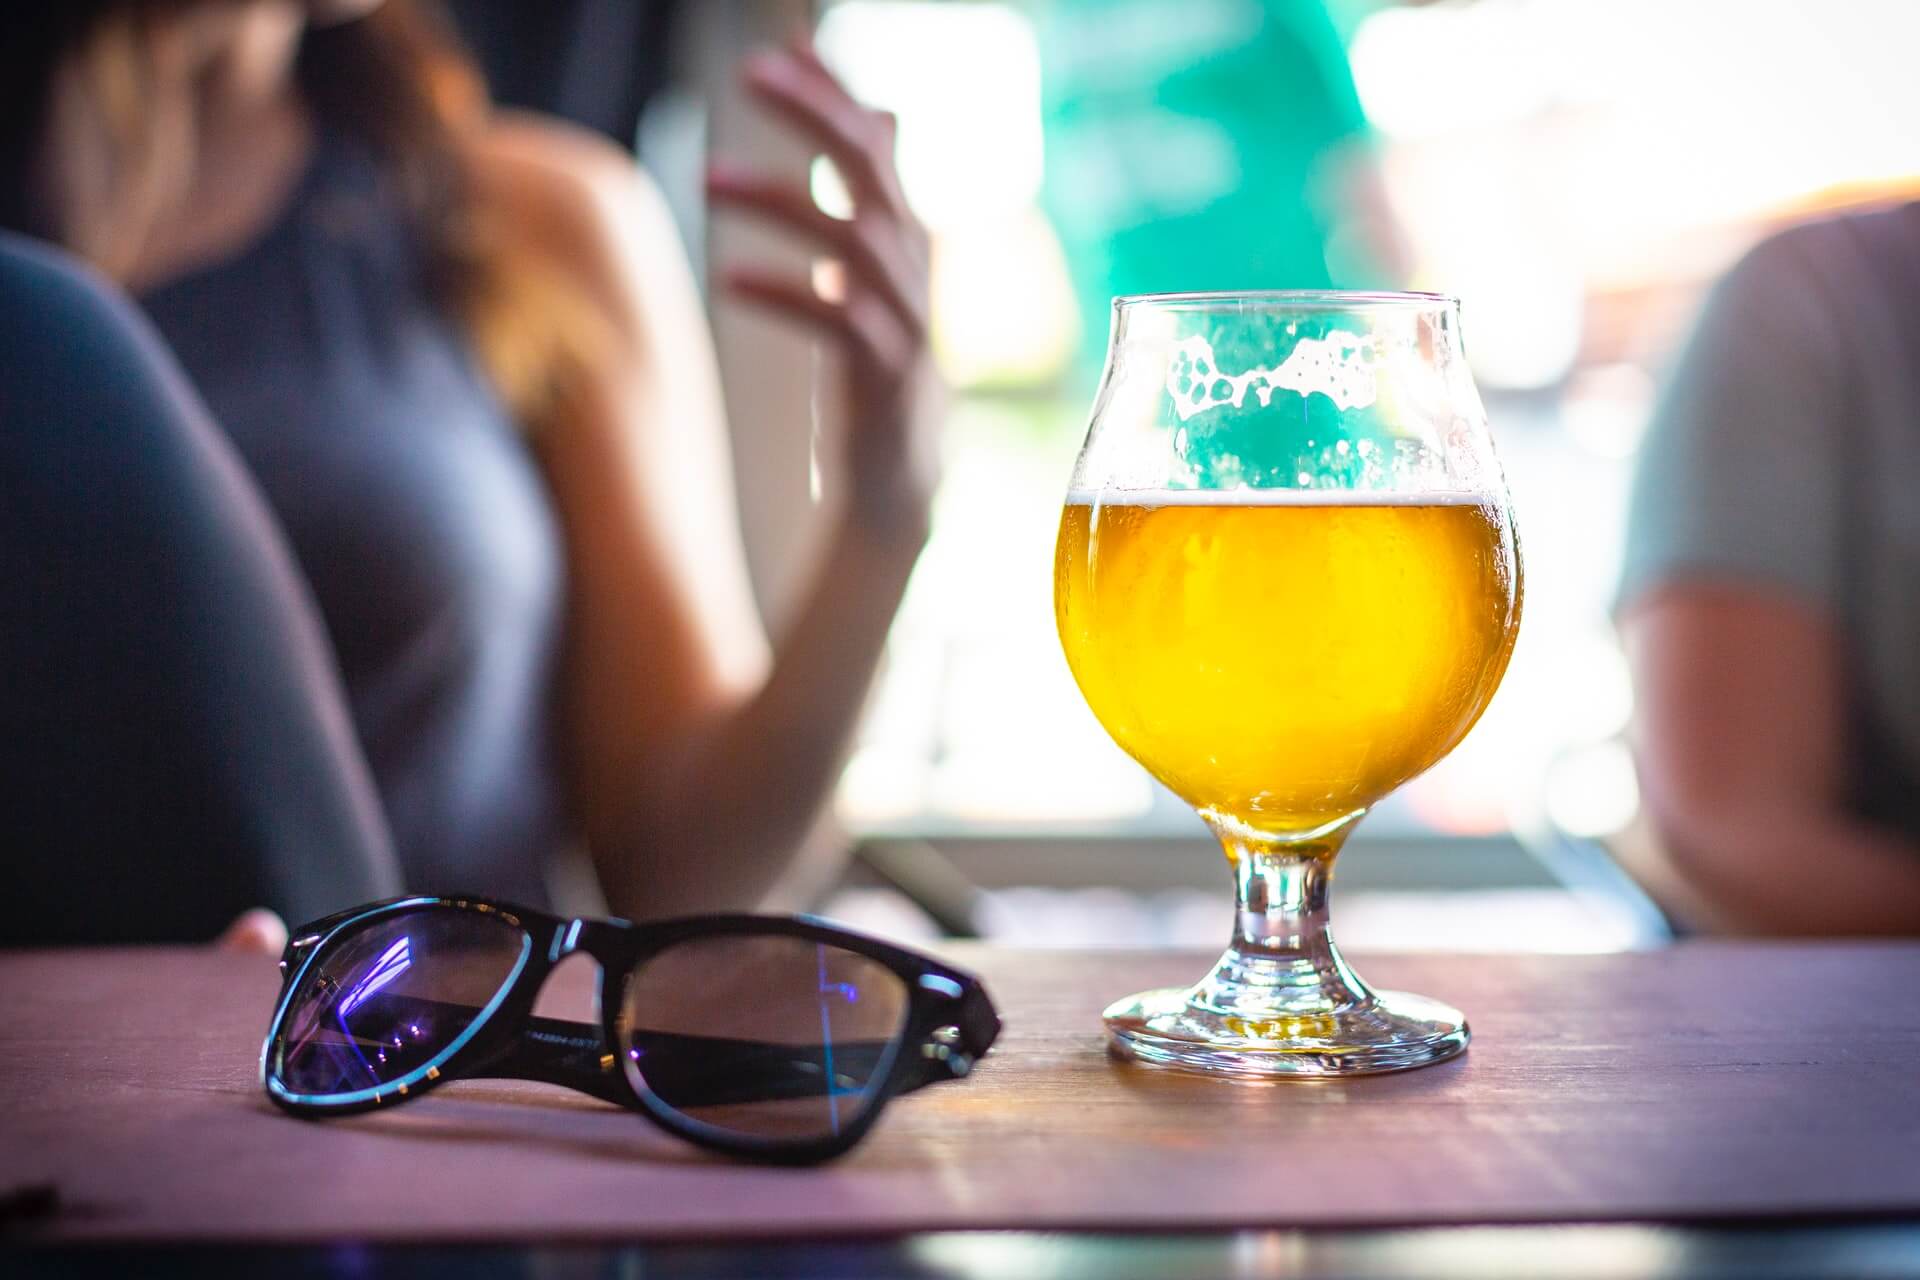 Sunglasses and beer on table at a bar